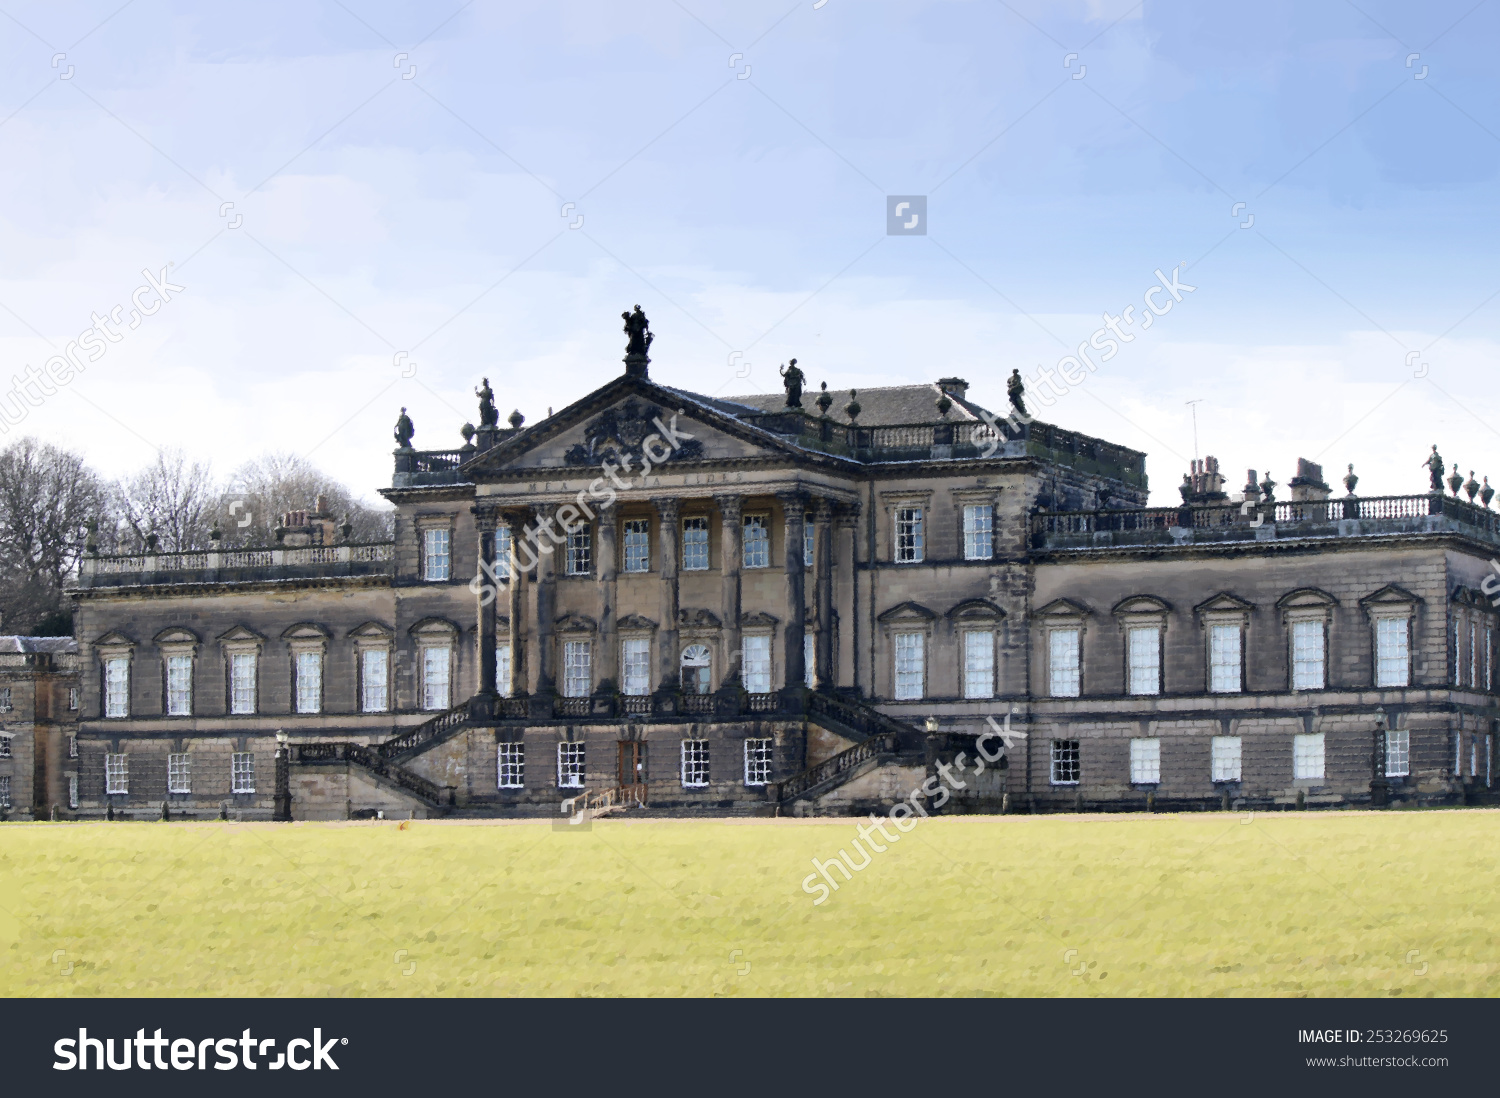 Digital Painting Of Wentworth Woodhouse Country House, A Grade 1.